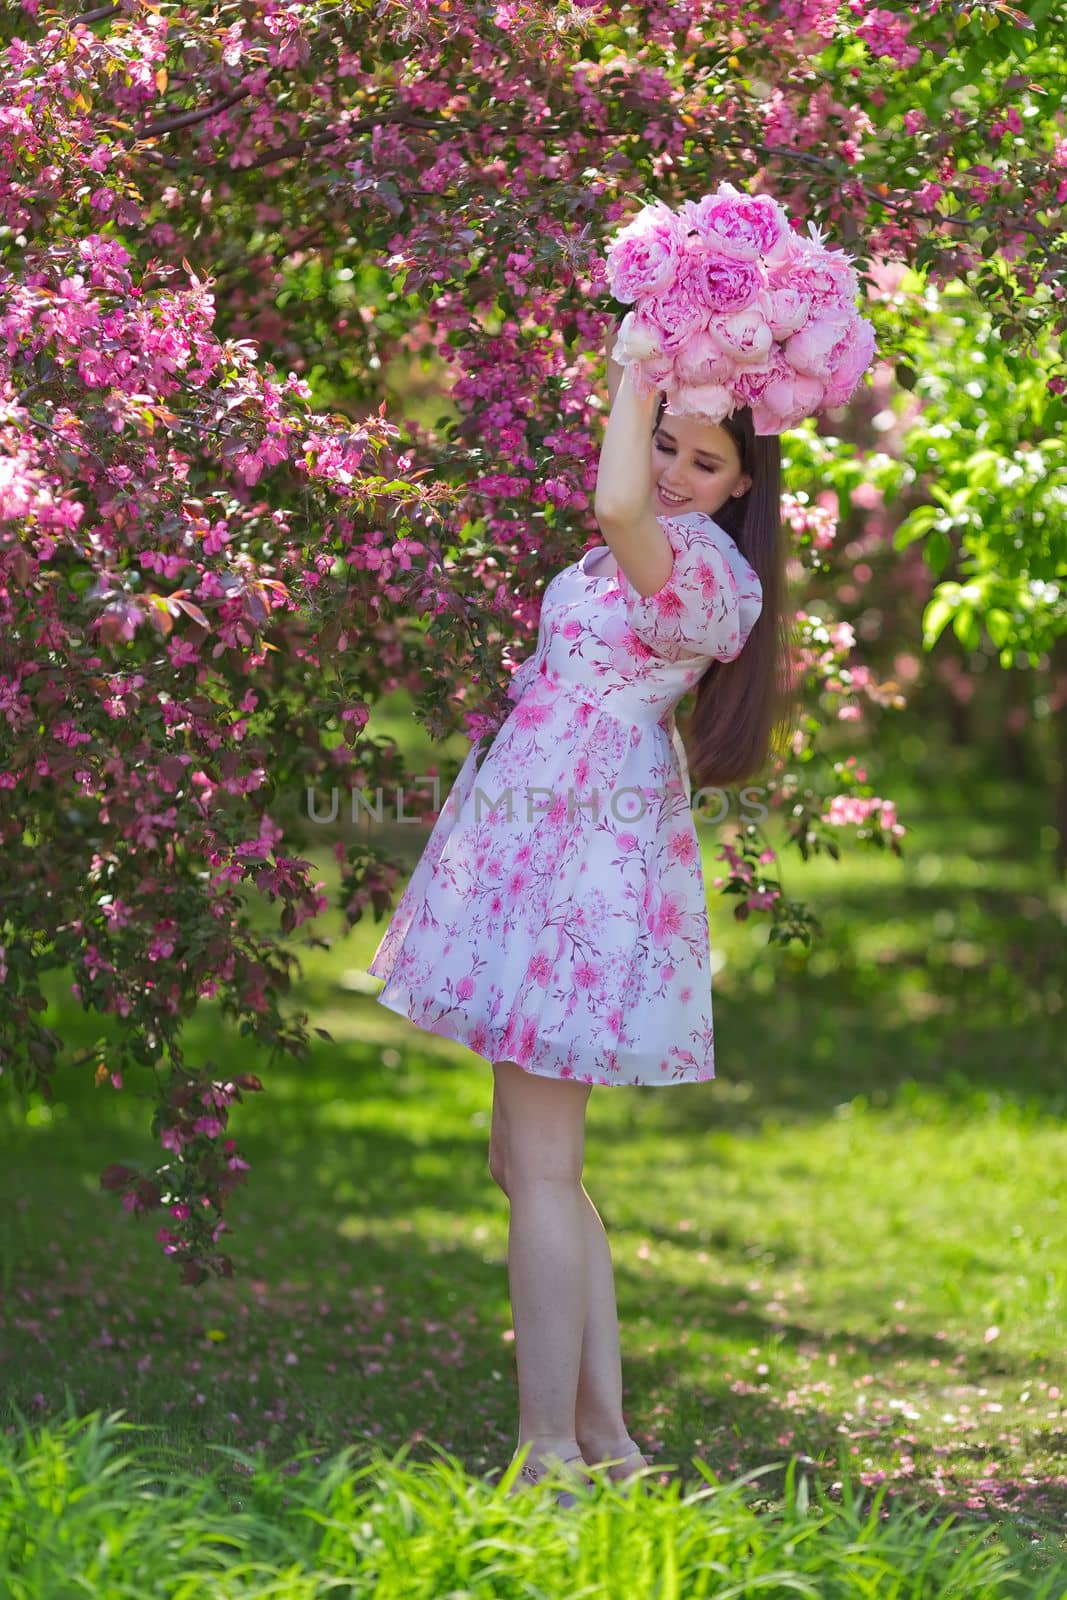 Happy girl with long hair, brunette, in a light pink dress, holding a bouquet of large pink peonies over her head, standing near pink blossom apple trees, in the garden on a sunny day. Space for copying. Vertical